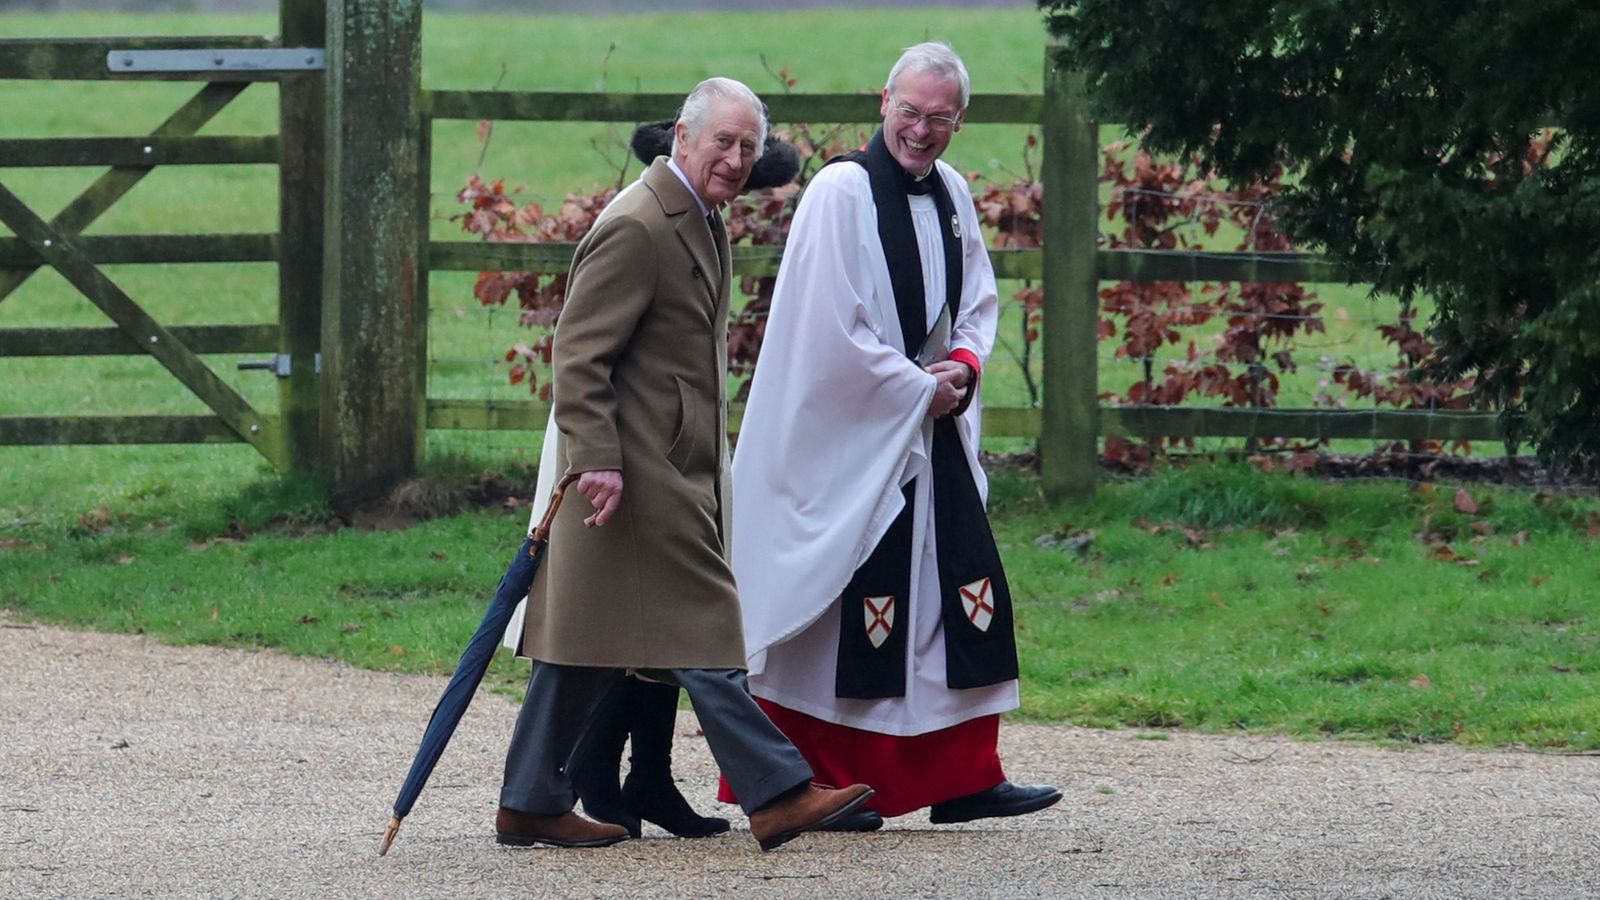 Smiling King Charles attends church for first time since cancer diagnosis